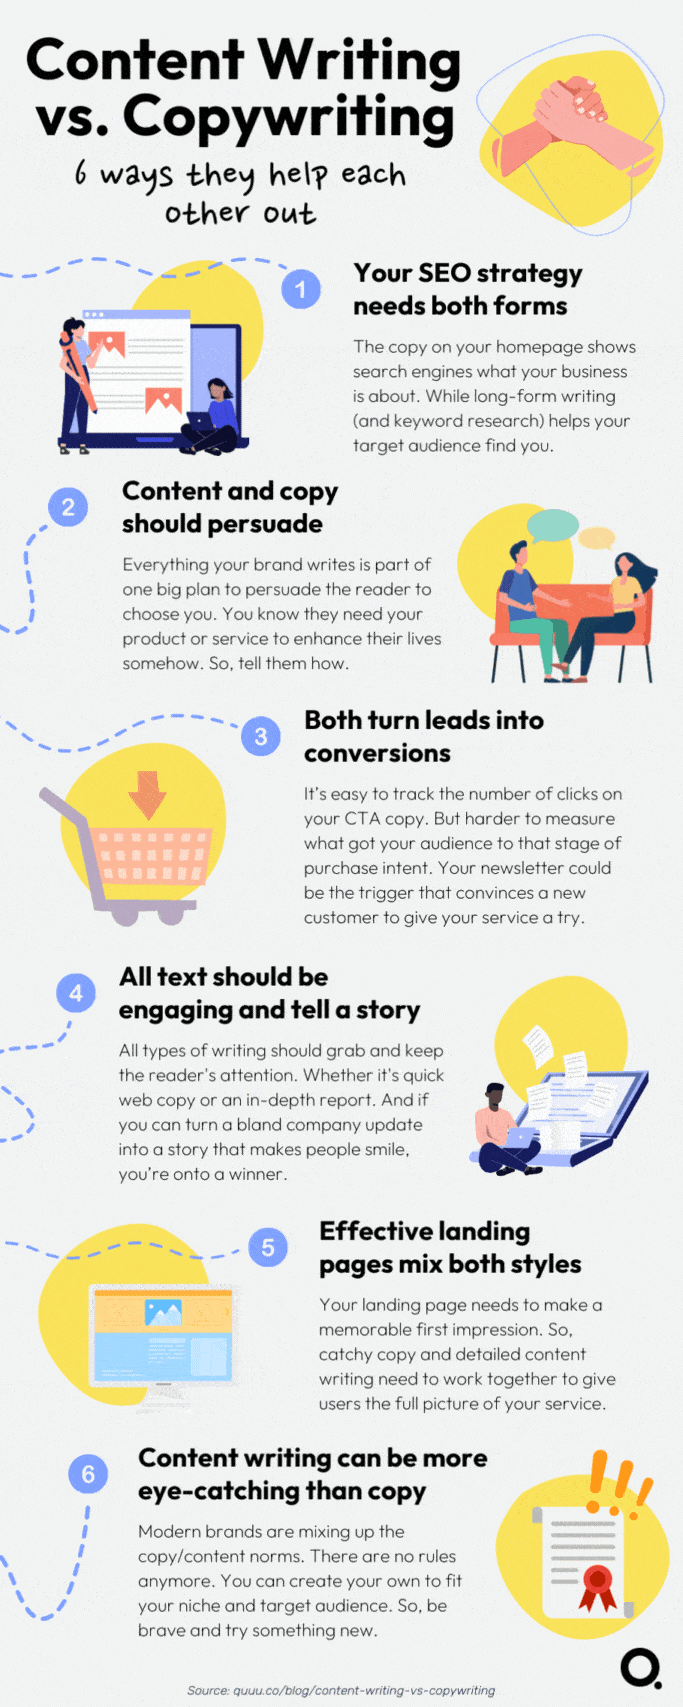 Content writing vs. copywriting infographic that shows 6 ways they help each other out rather than differ.